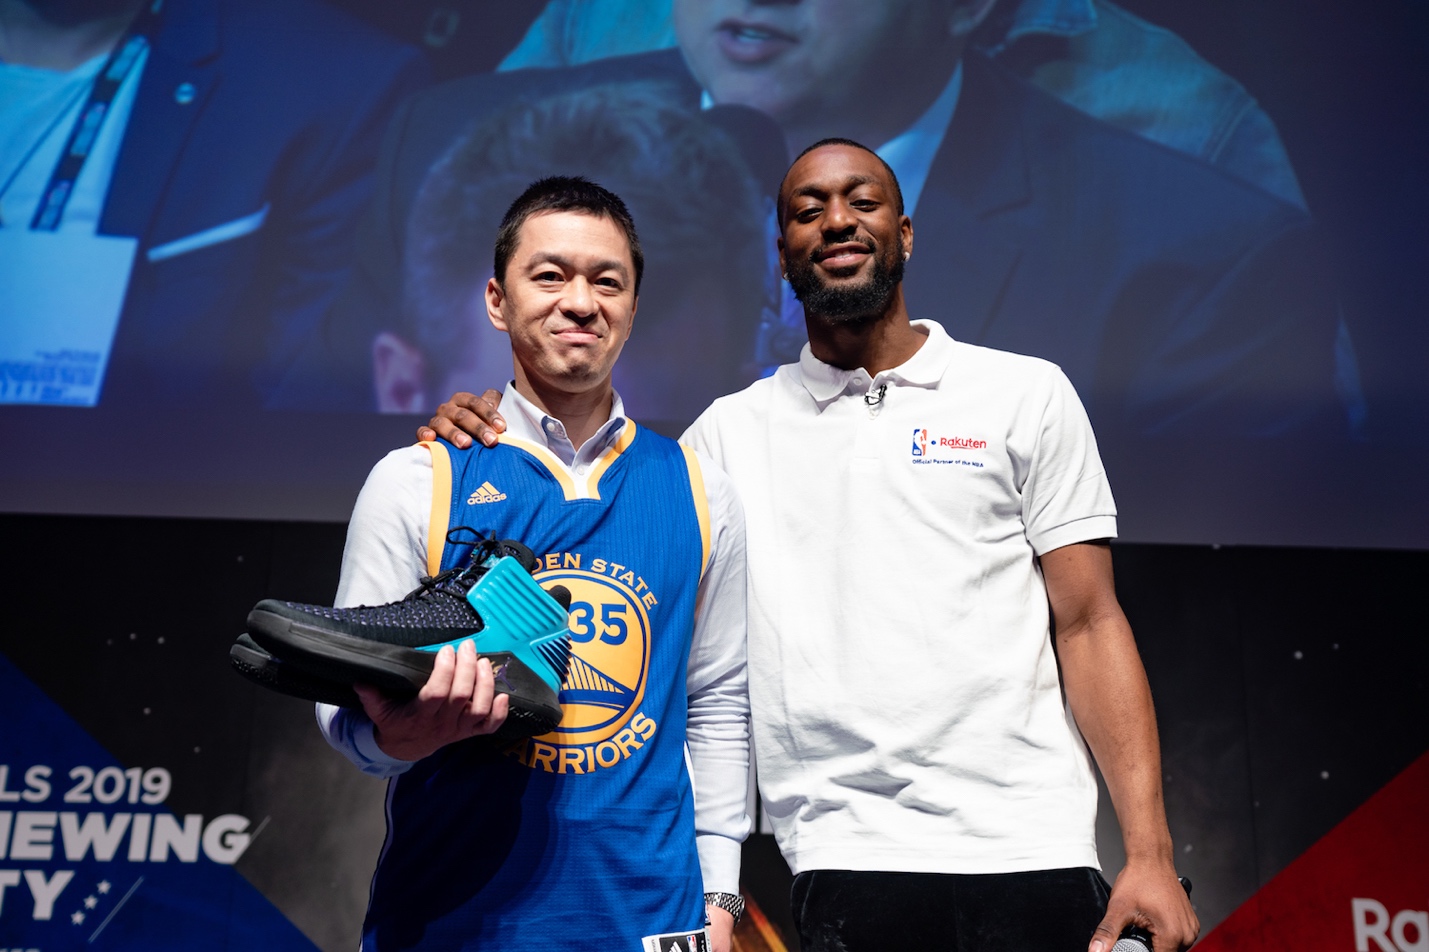 Kemba Walker gave a pair of his signature NIKE basketball shoes to a fan at the Rakuten TV NBA Finals public viewing party in Tokyo.